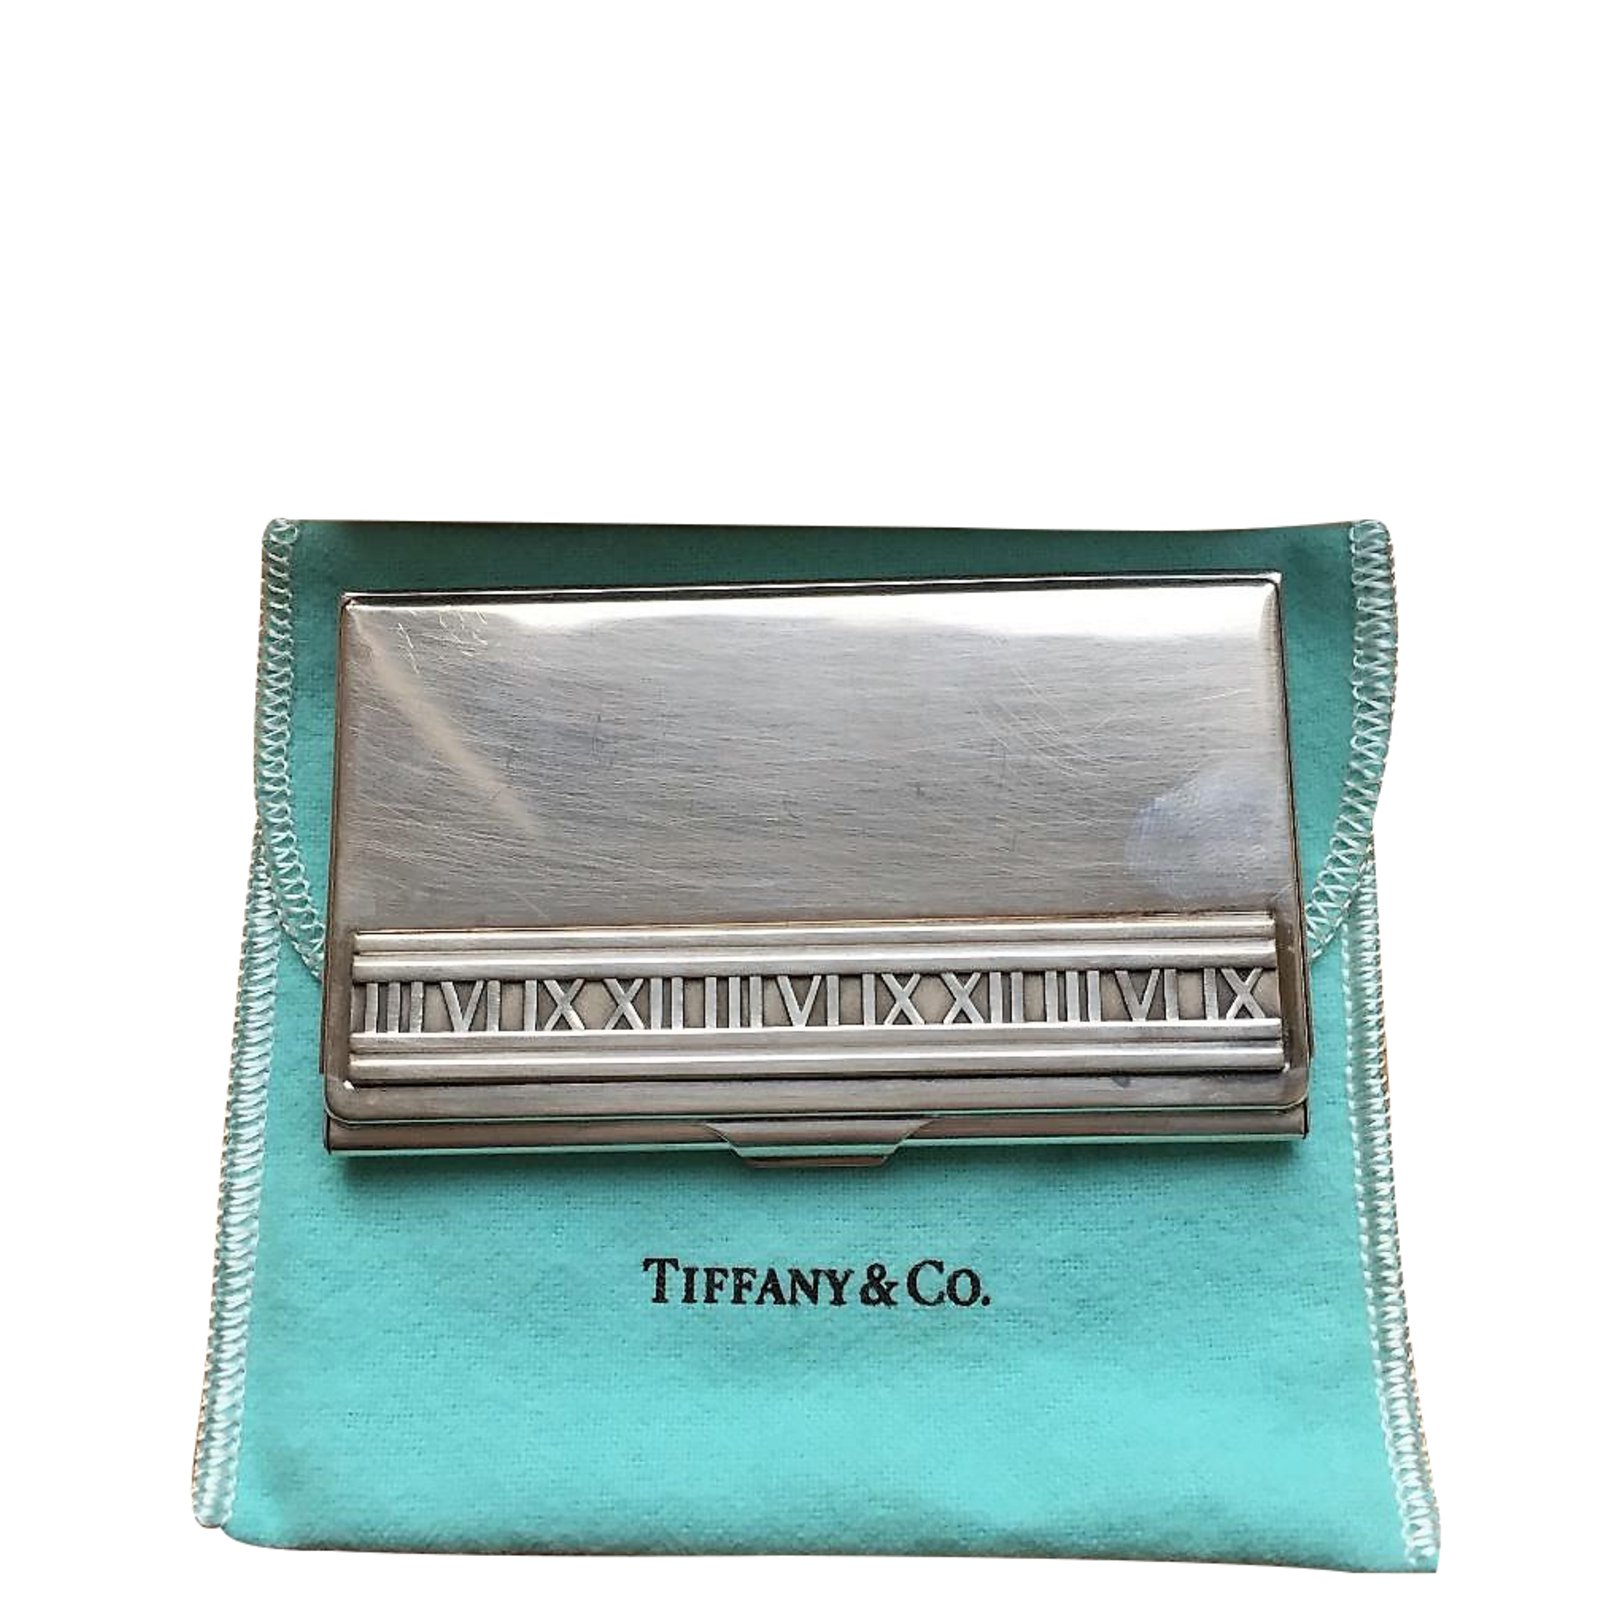 tiffany and co business card holder